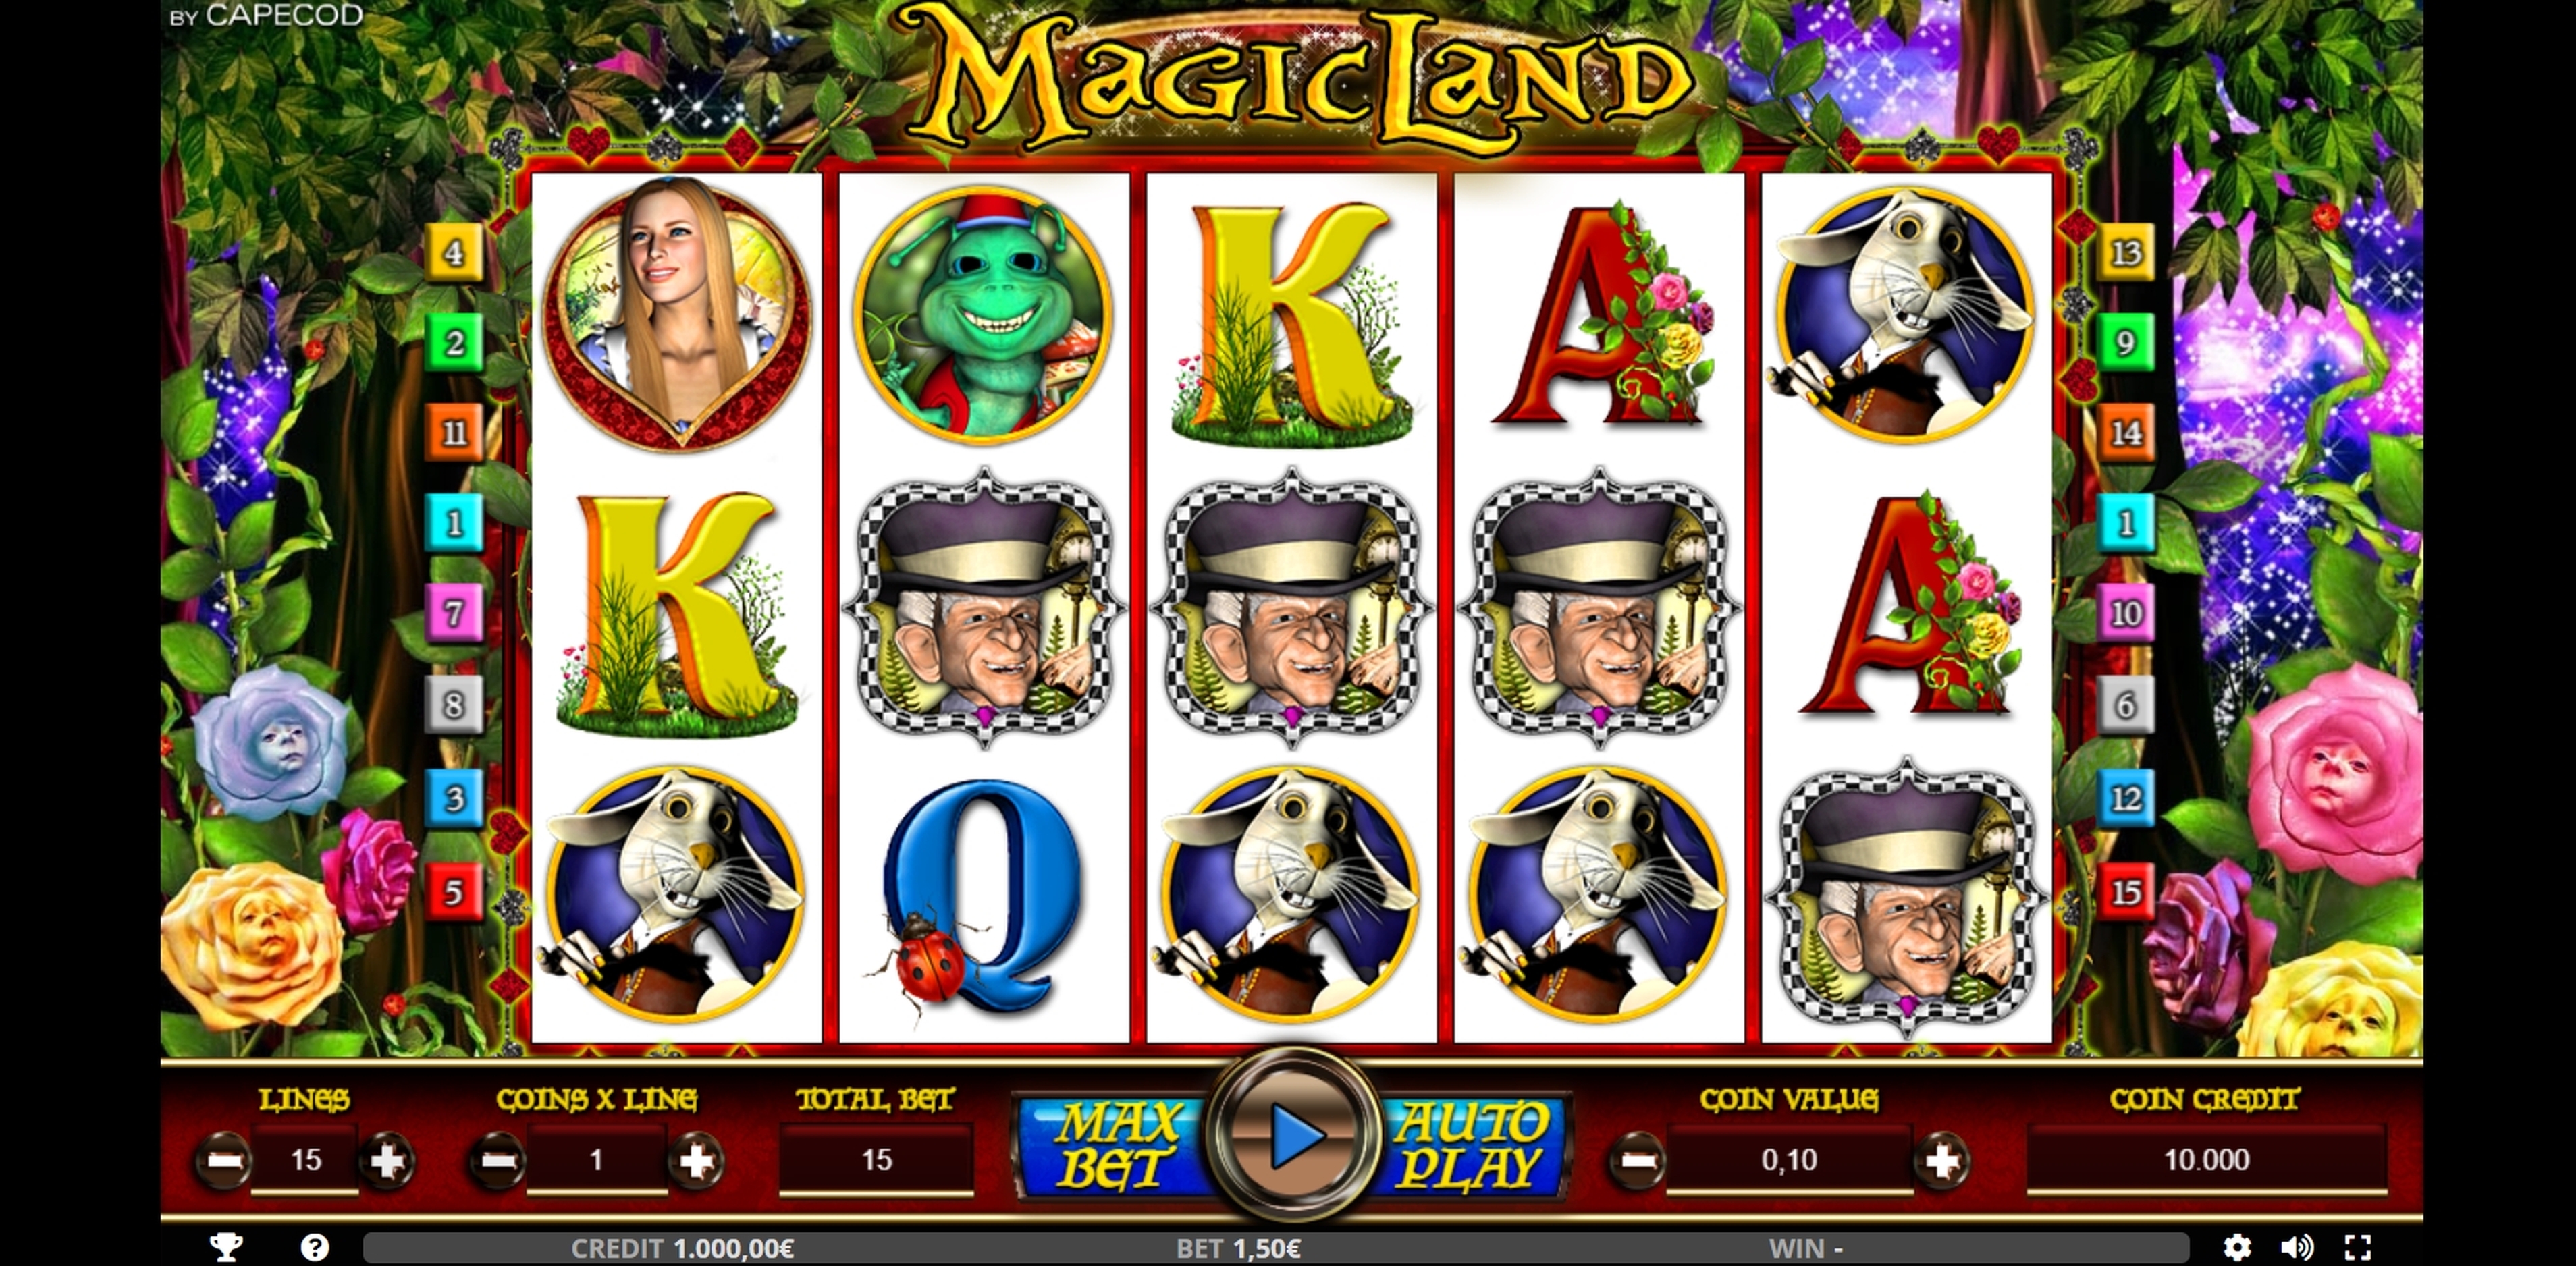 Reels in MAGICLAND Slot Game by Capecod Gaming